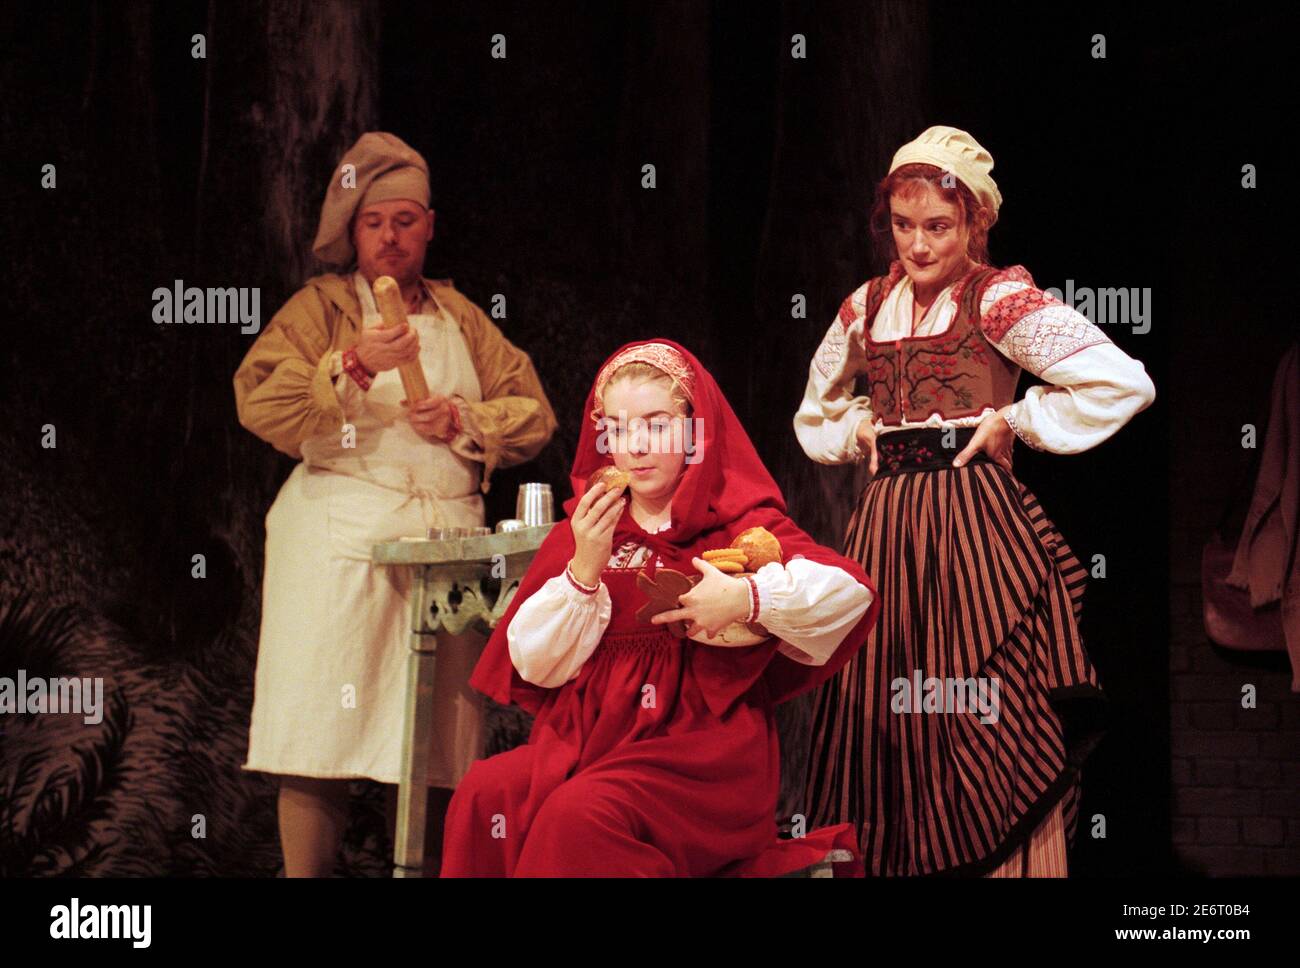 l-r: Nicholas Holder (The Baker), Sheridan Smith (Red Riding Hood), Sophie Thompson (The Baker's Wife) in INTO THE WOODS at the Donmar Warehouse, London WC2  16/11/1998  music & lyrics: Stephen Sondheim  book: James Lapine  design: Bob Crowley  lighting: Paul Pyant  director: John Crowley Stock Photo